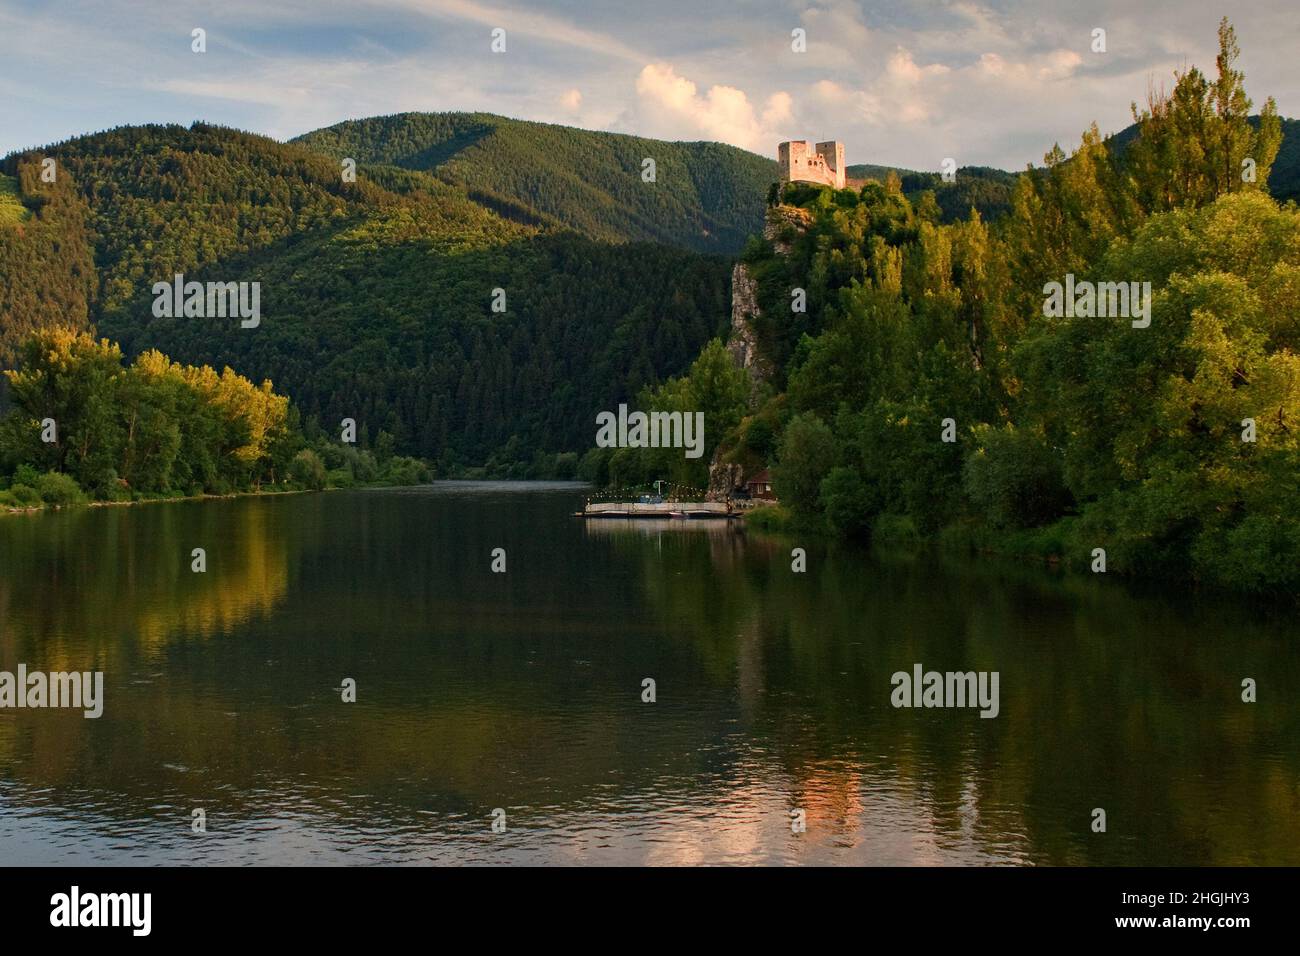 Medieval castle Strecno on Vah river with raft near of town Zilina, central Europe, Slovakia Stock Photo